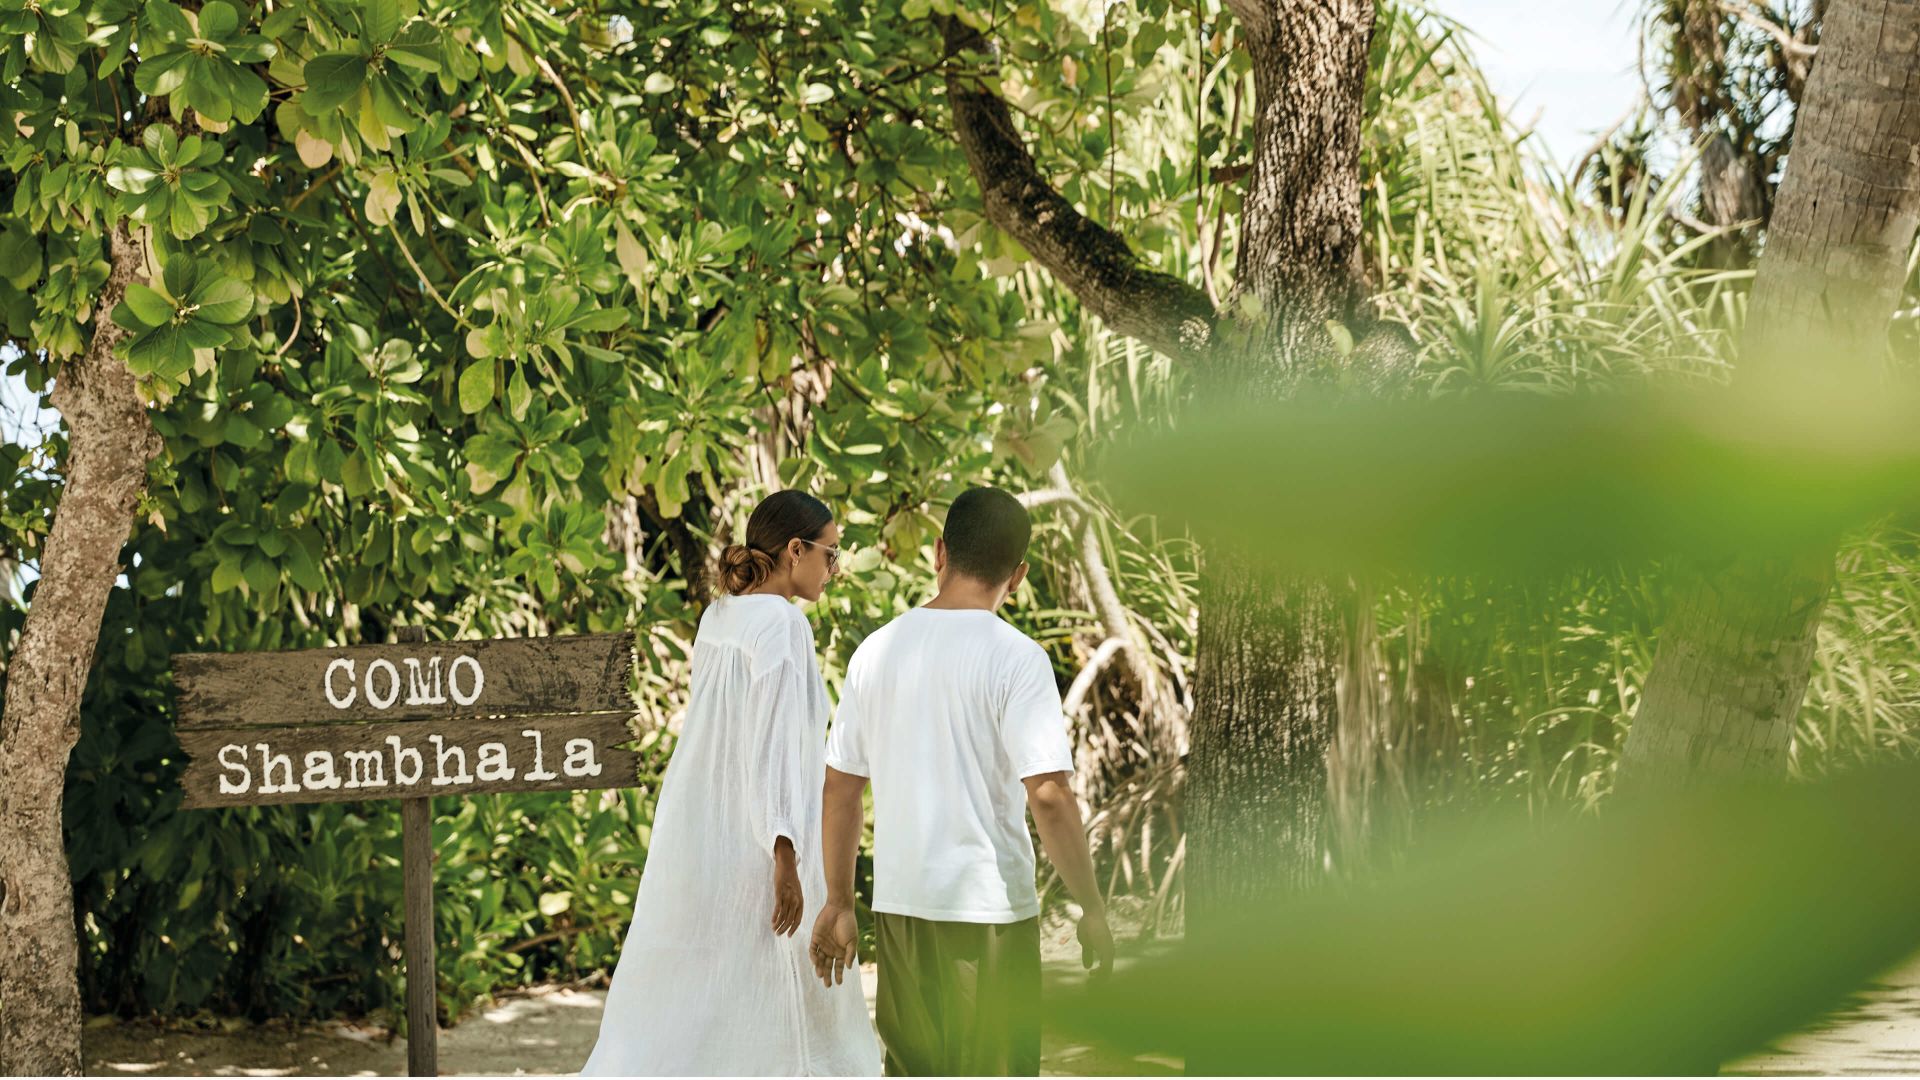 A Man And Woman Walking Down A Path With A Sign And Trees